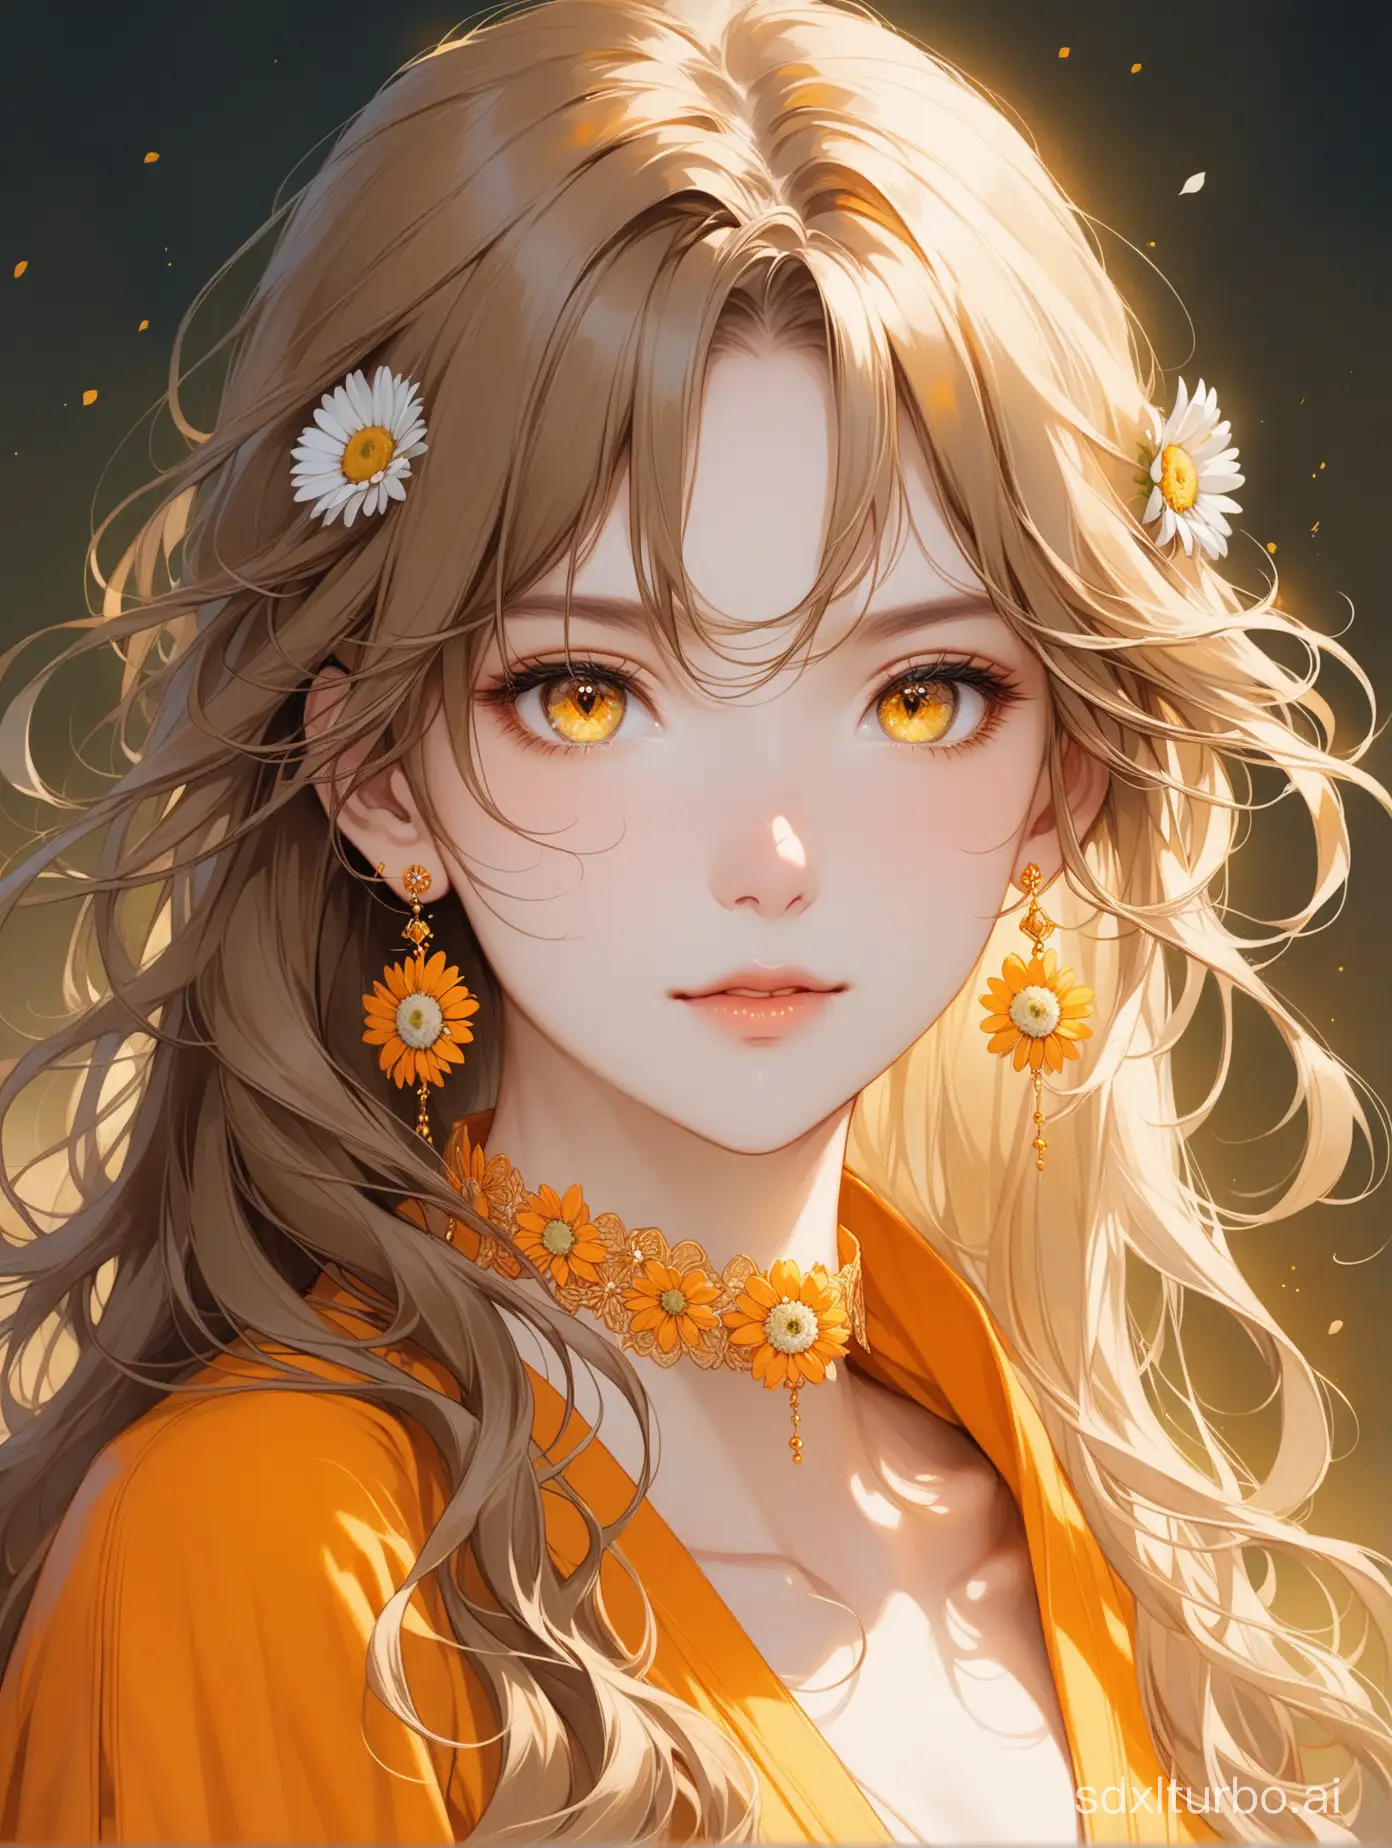 Portrait-of-a-Girl-with-Light-Brown-Curly-Hair-and-Yellow-Earrings